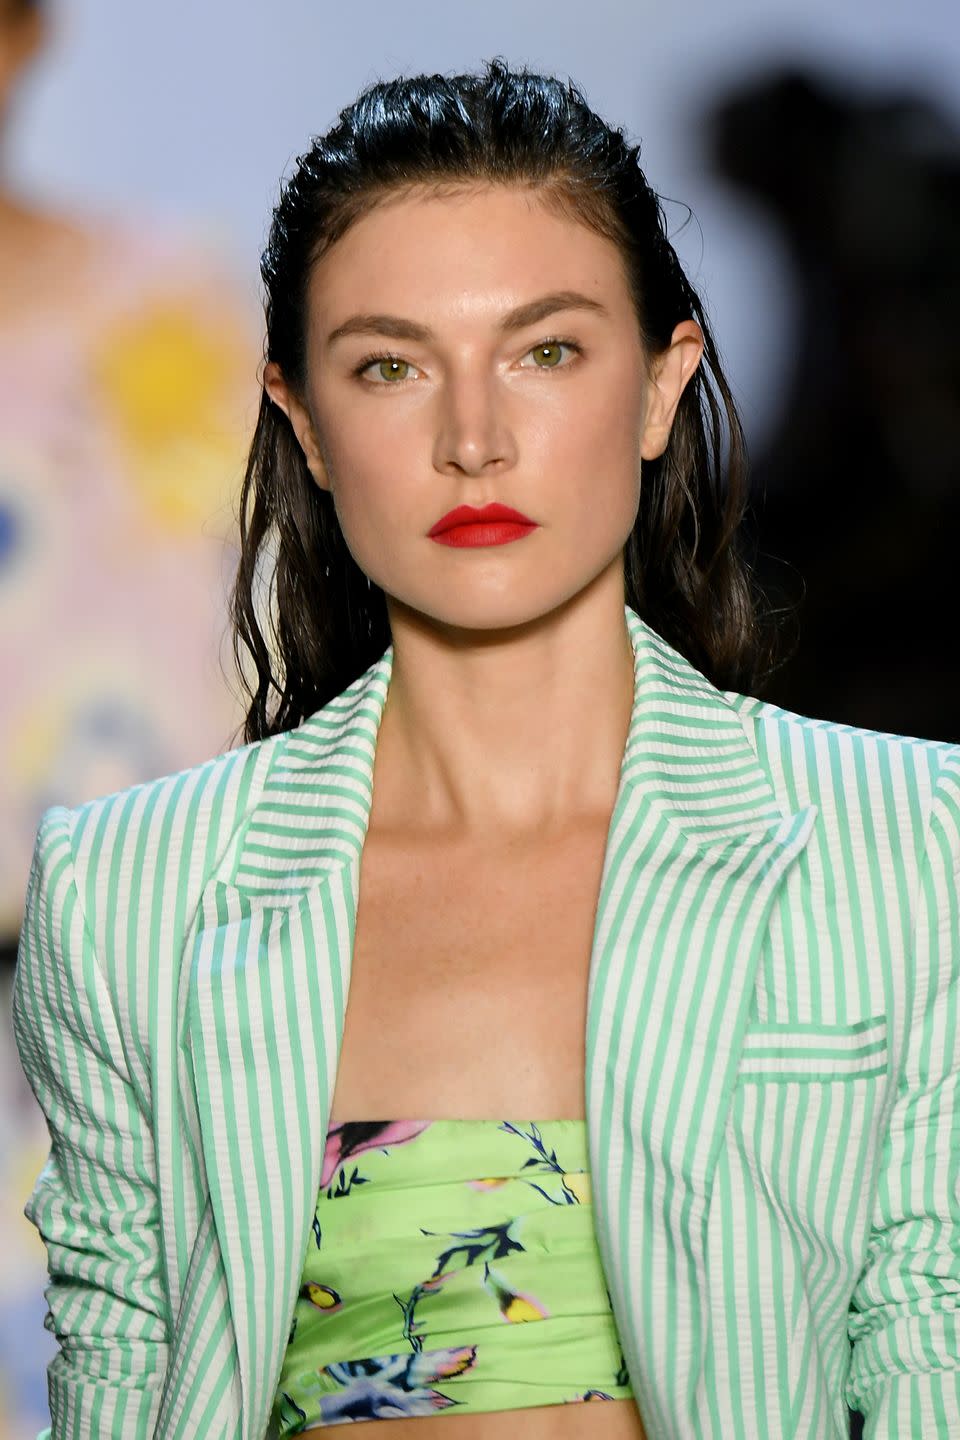 6) Spring 2020 Makeup Trend: Red Lipstick